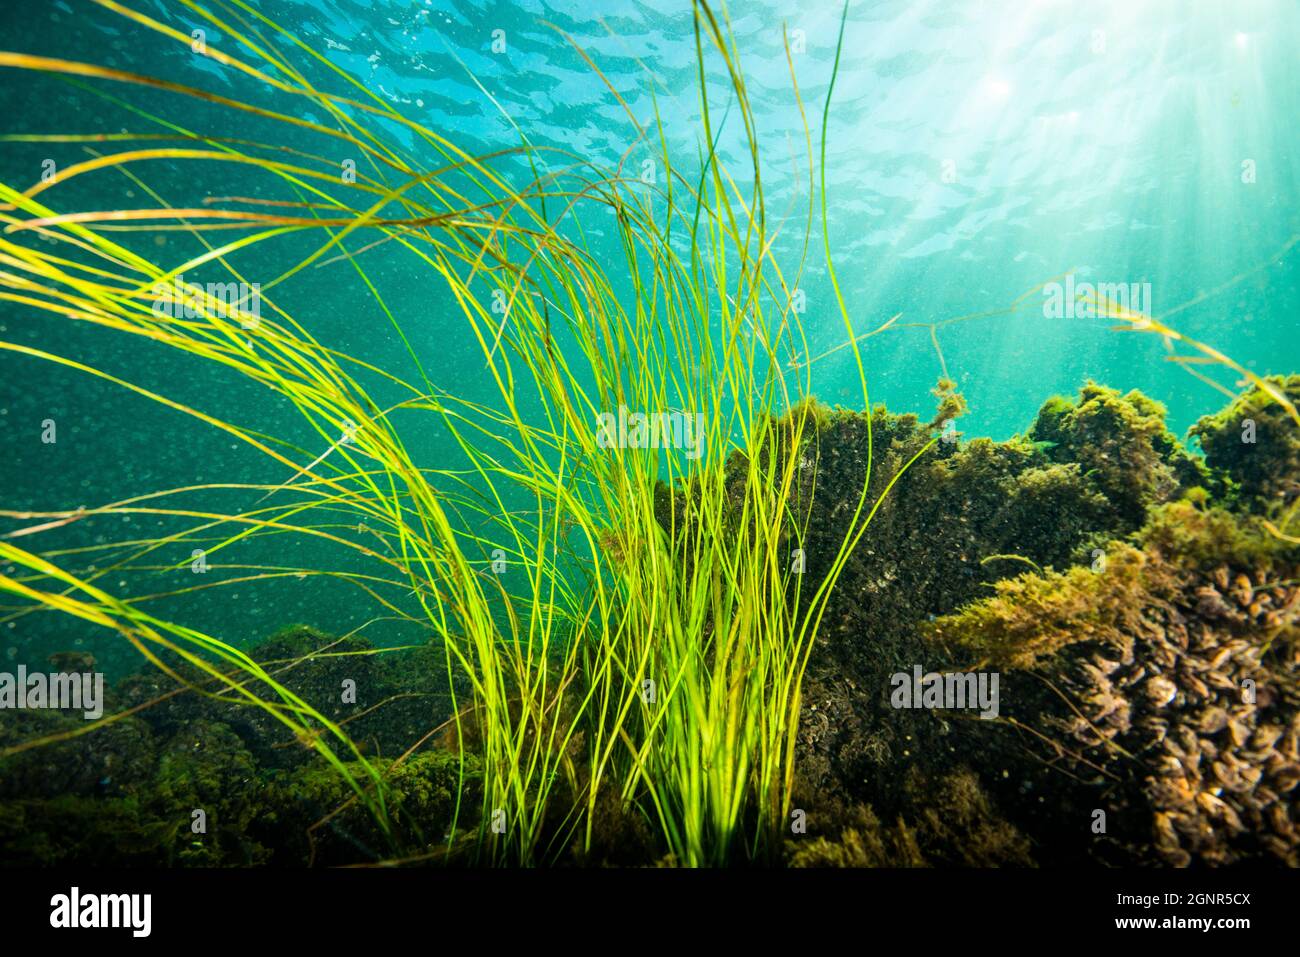 American Eel-grass underwater in the St. Lawrence River Stock Photo